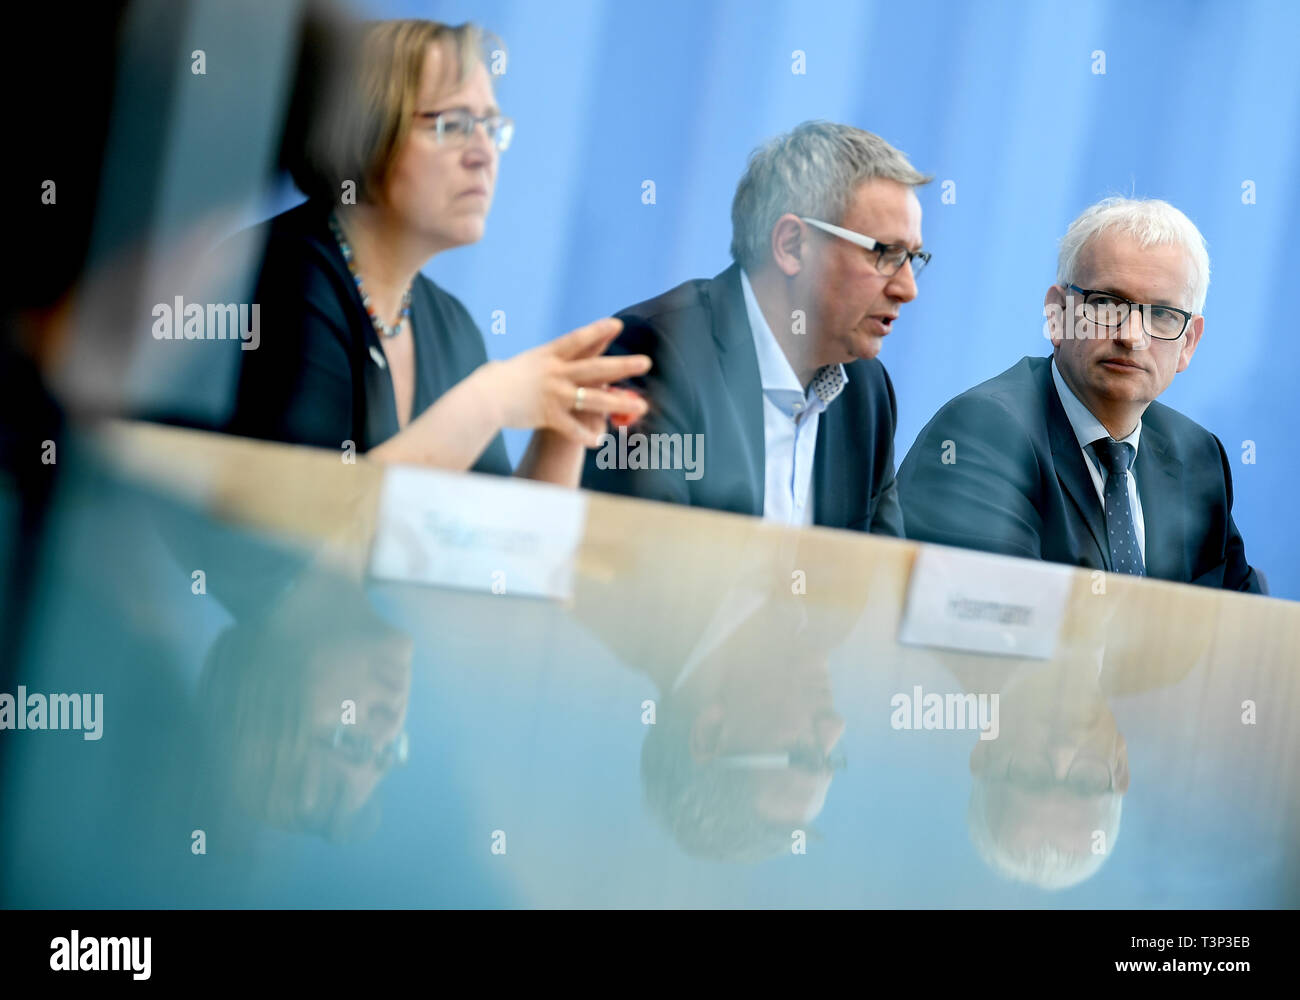 Berlin, Germany. 11th Apr, 2019. Kerstin Haarmann (l-r), Federal Chairman of the German Ecological Transport Club (VCD), Michael Mertens, Regional Chairman of the NRW Police Union and Jürgen Resch, Federal Managing Director of Deutsche Umwelthilfe, will hold a press conference on the speed limit in Germany. Credit: Britta Pedersen/dpa-Zentralbild/dpa/Alamy Live News Stock Photo